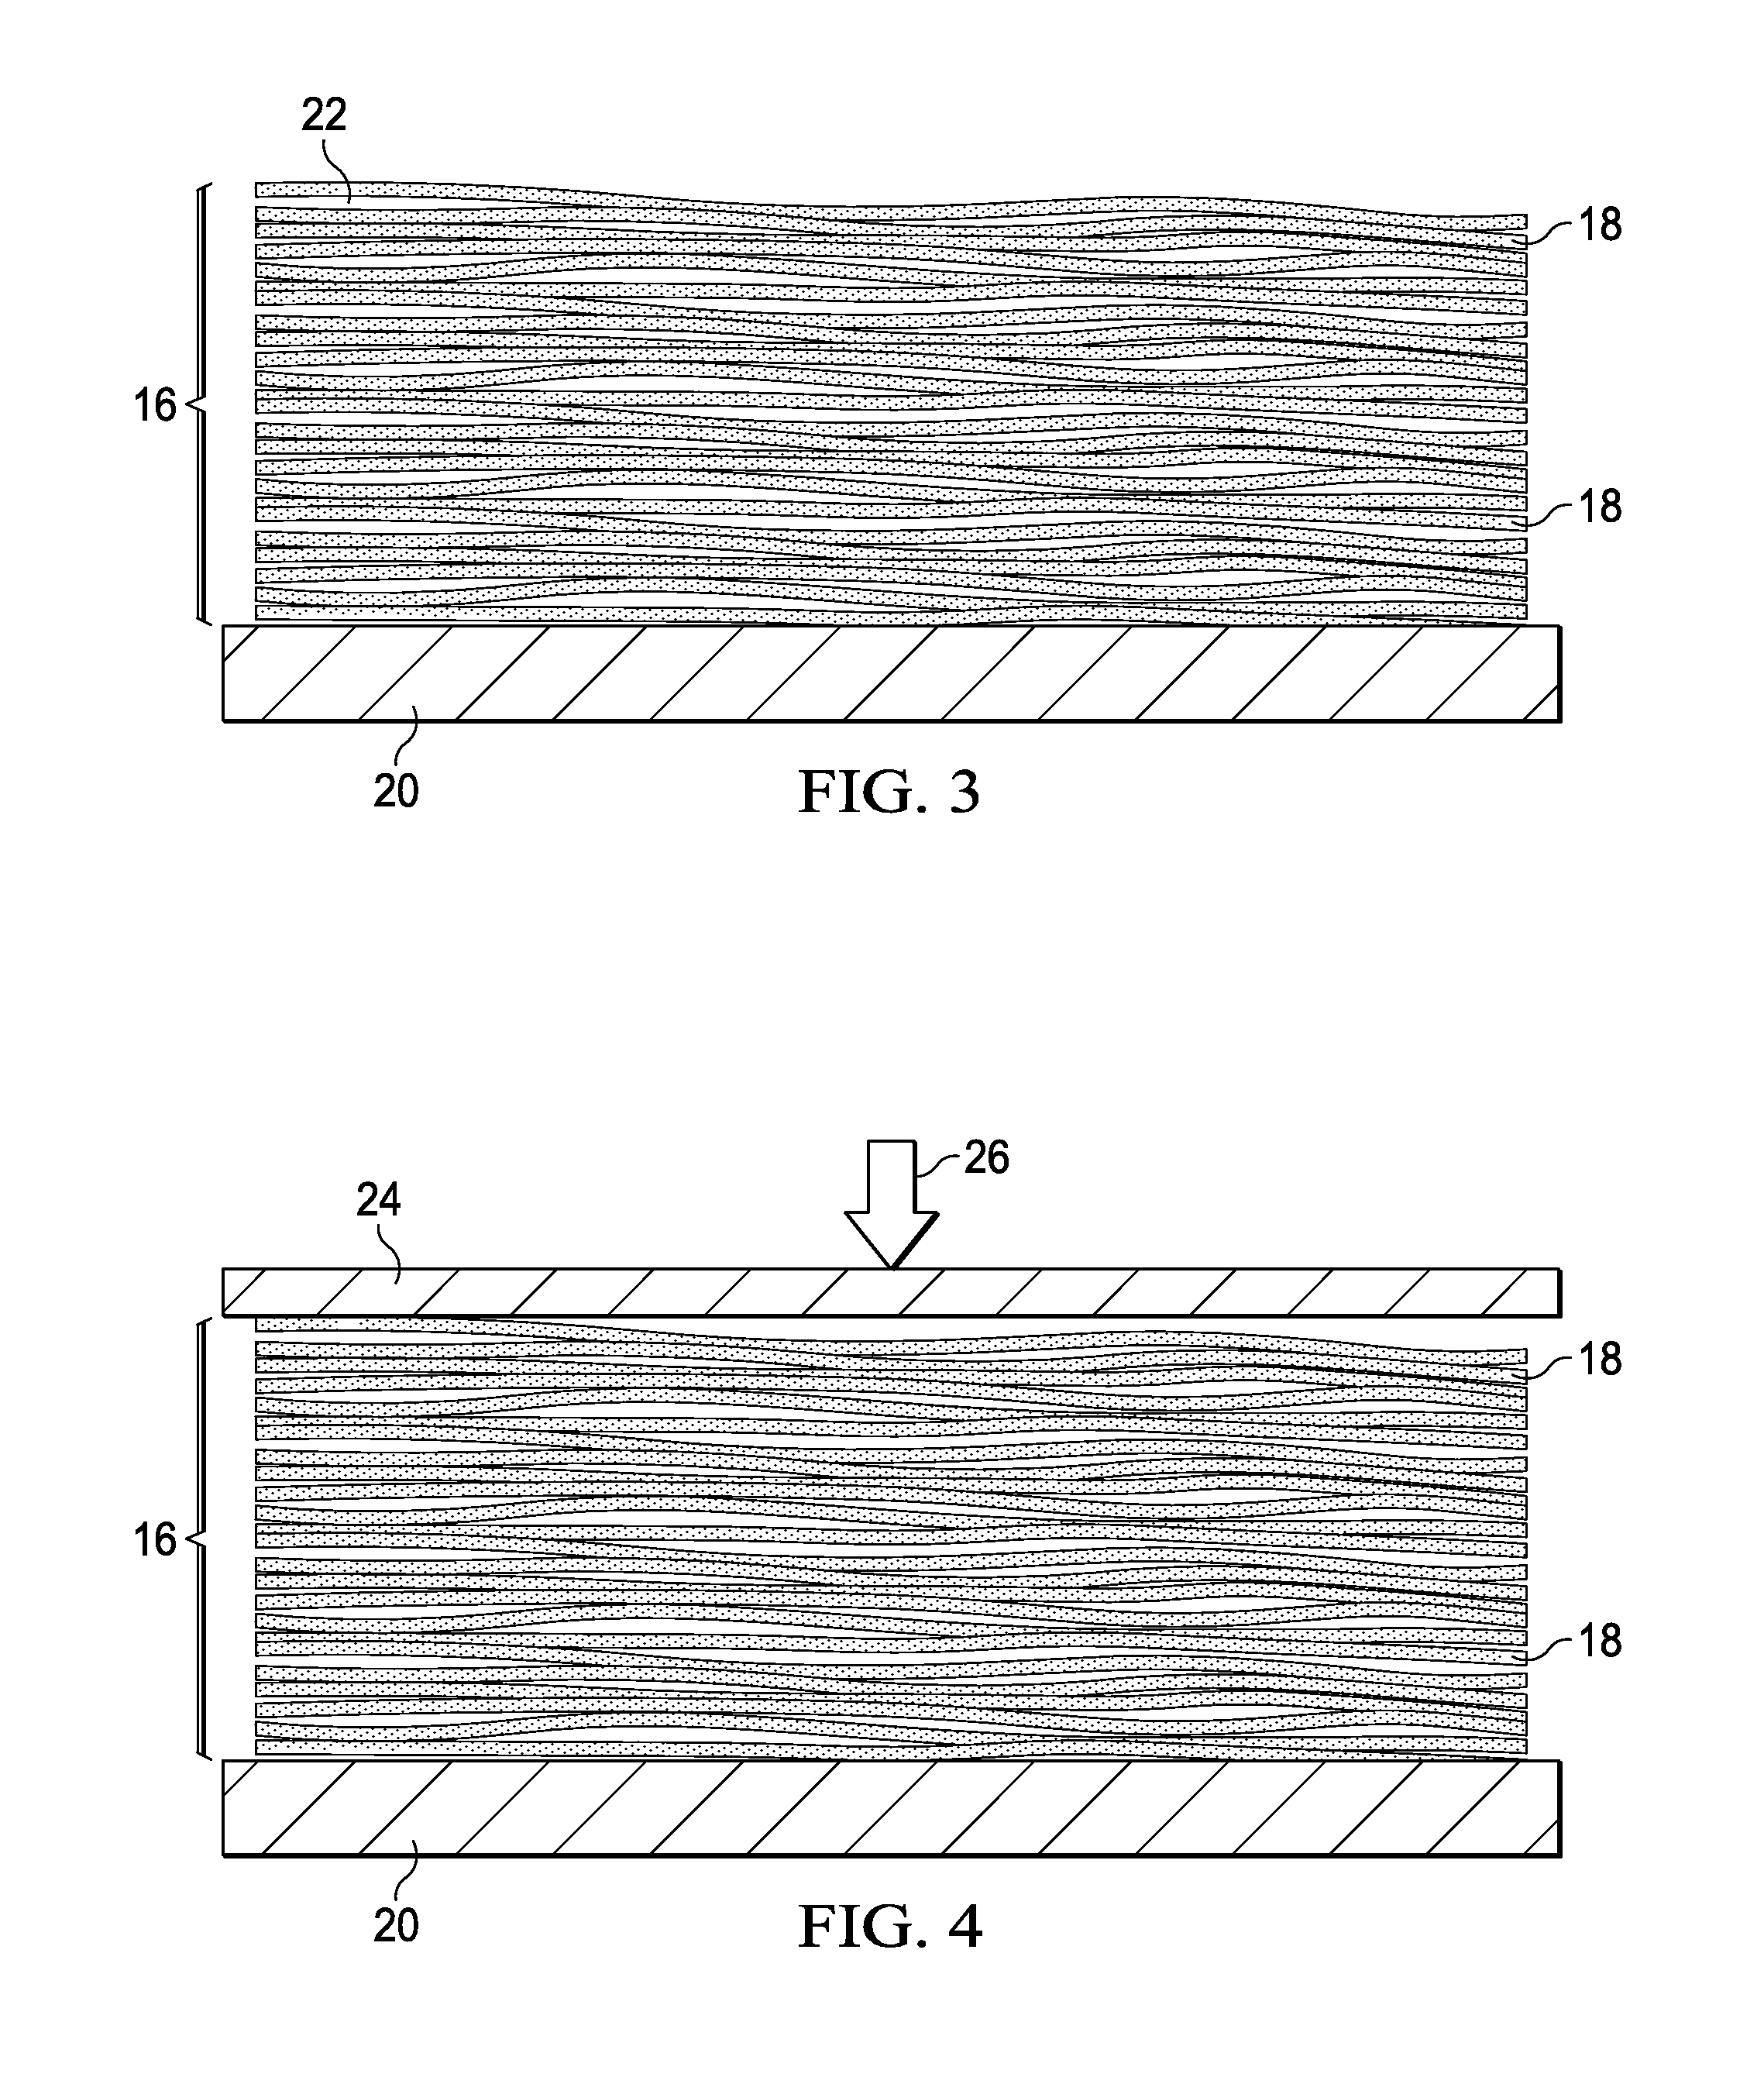 Method and Apparatus for Forming Thick Thermoplastic Composite Structures